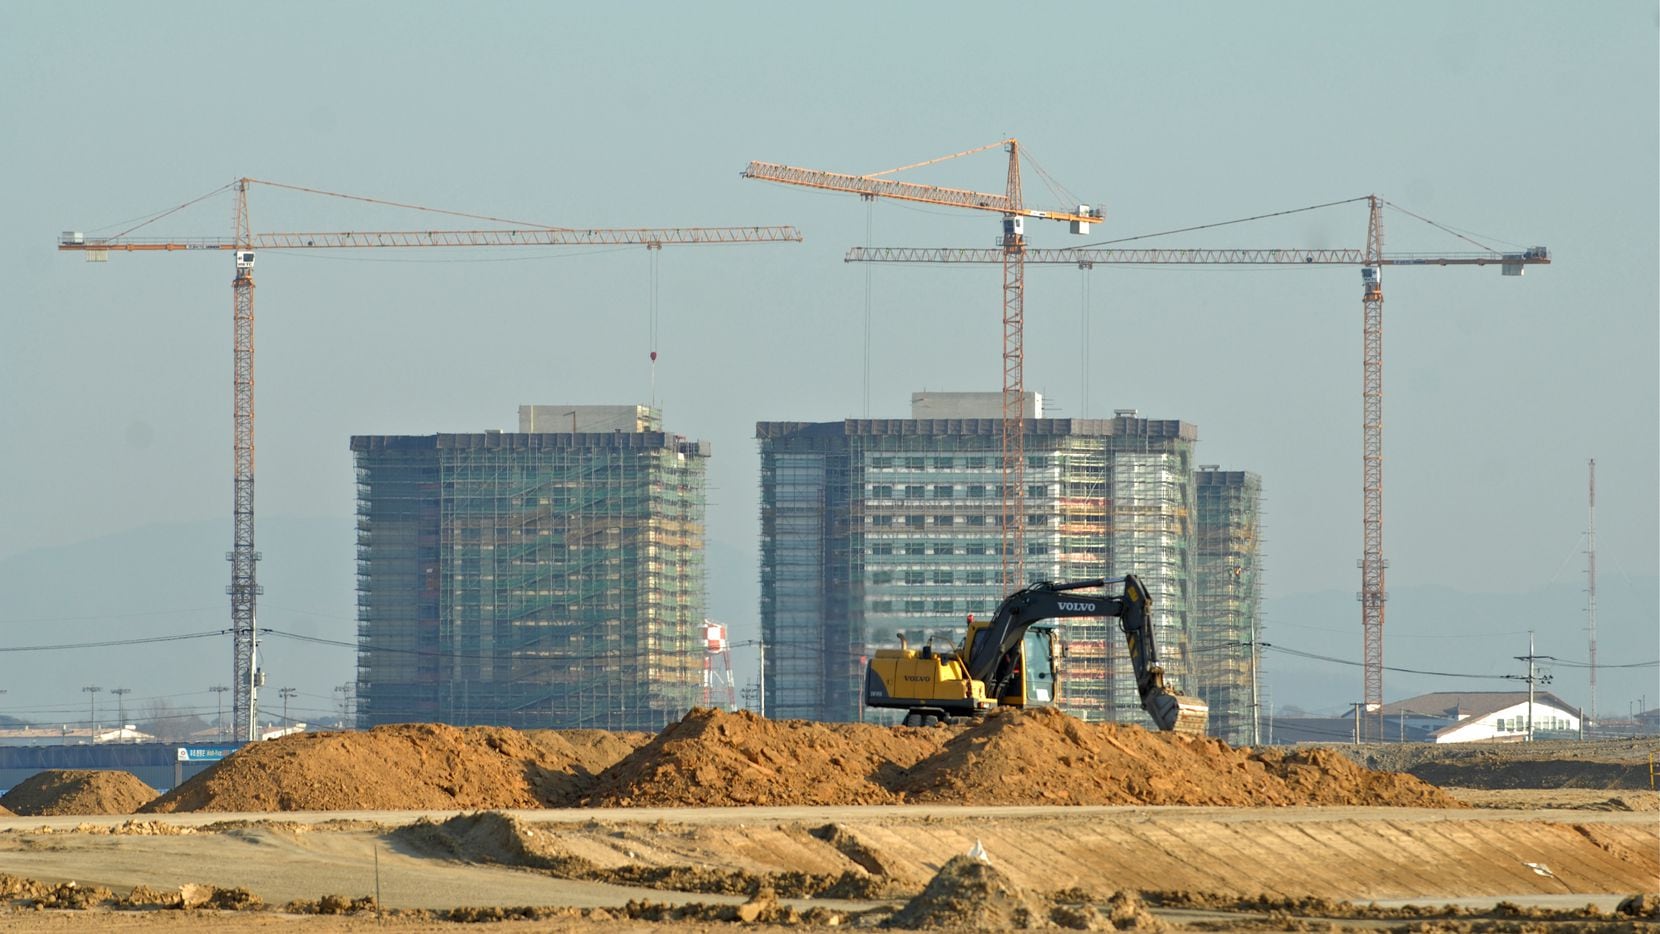 Construction of the U.S. Army's new base in Korea is one of the largest projects in the military’s construction and host nation funding program.